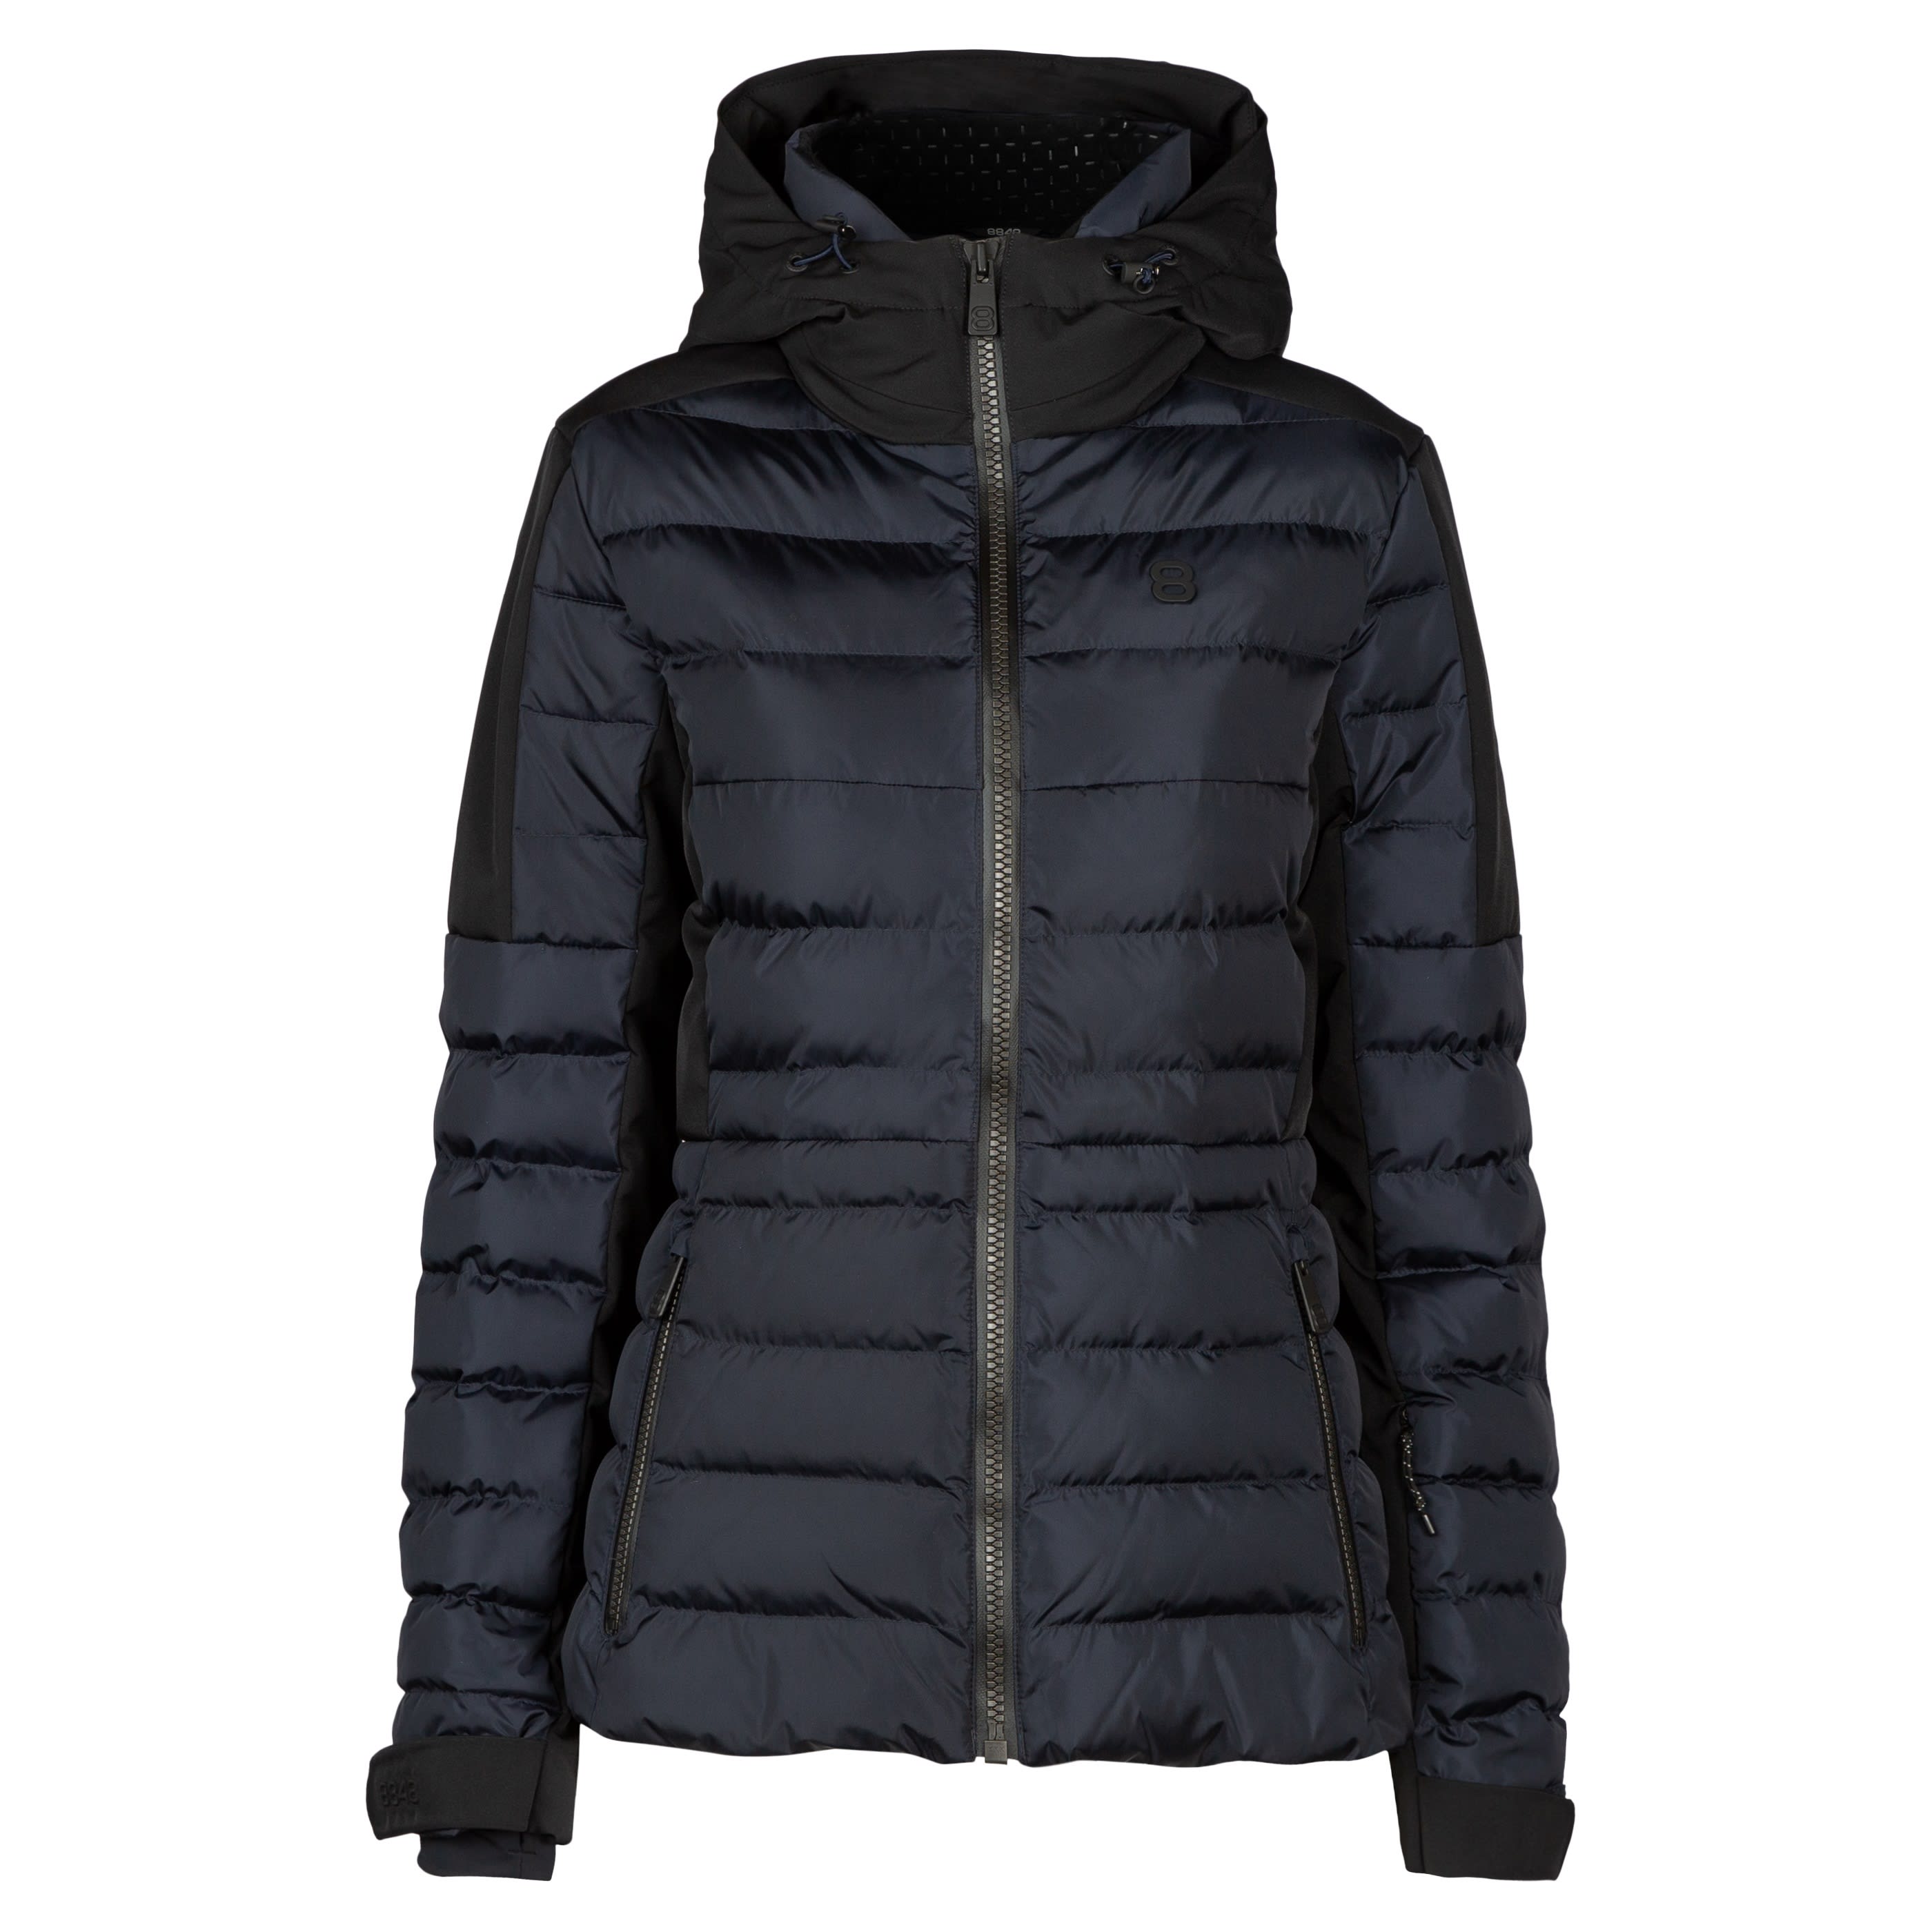 Buy 8848 Altitude Women's Anoesjka Jacket from Outnorth